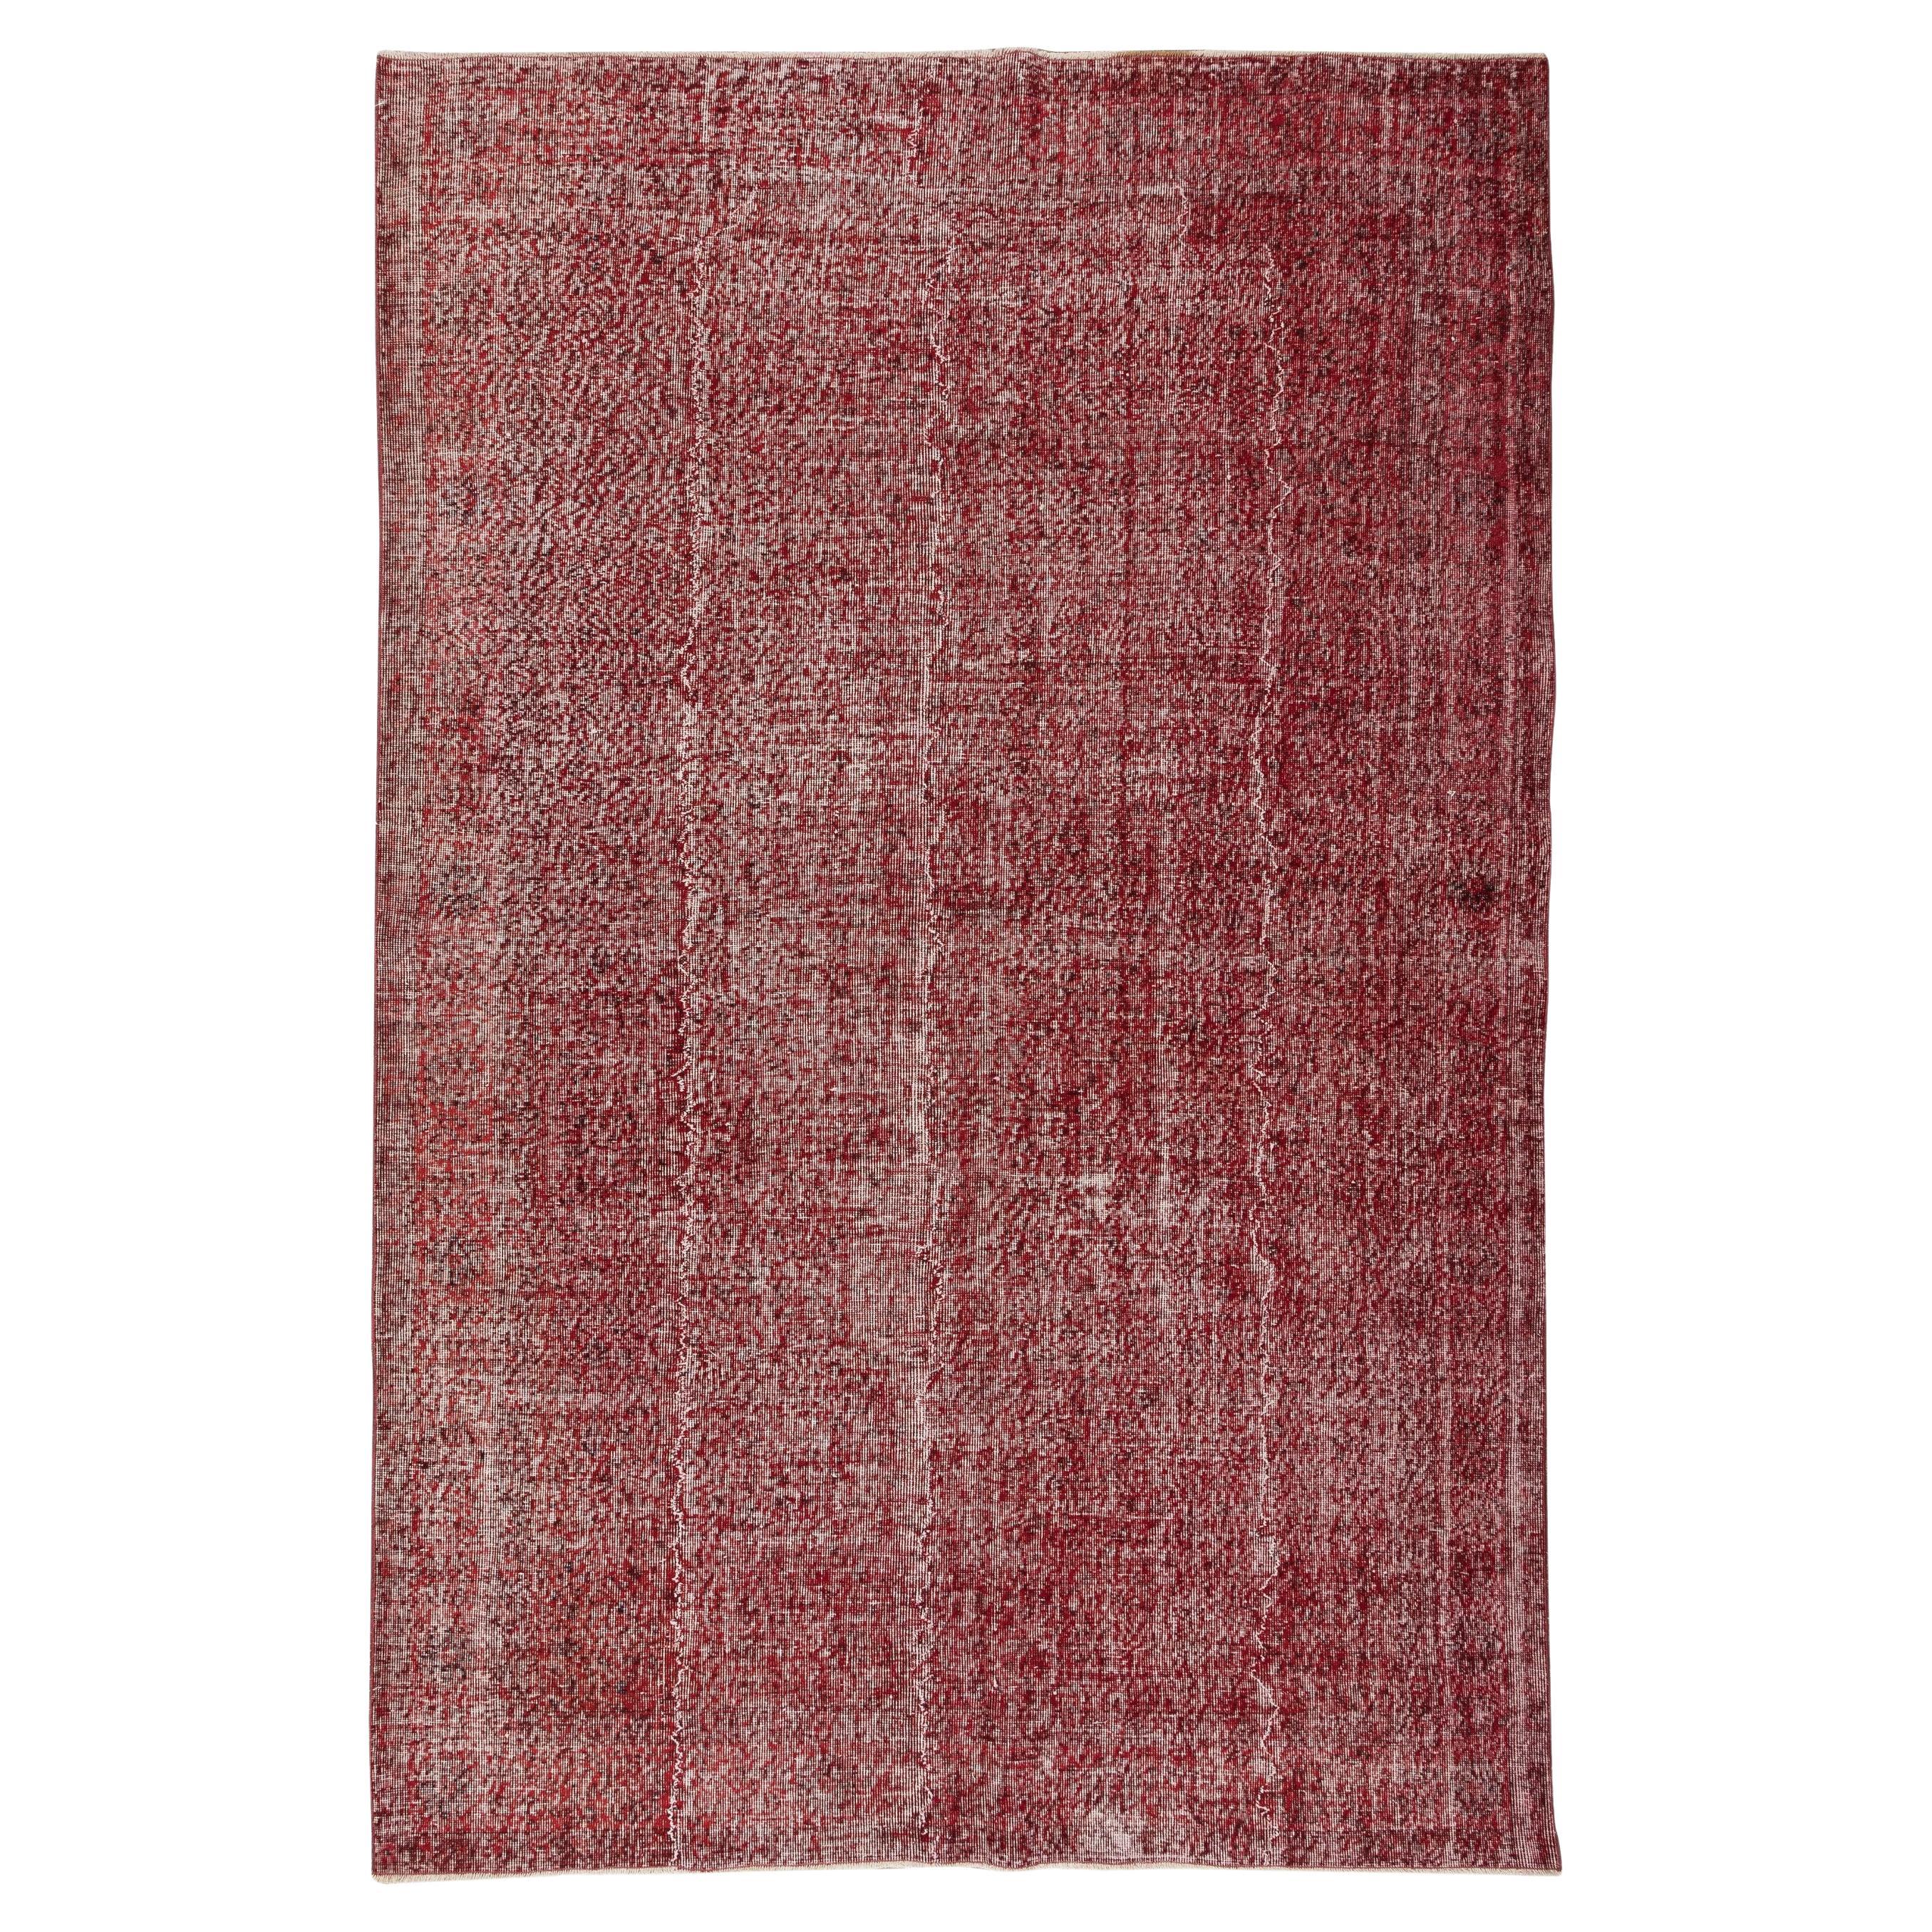 6.8x10 Ft Hand Knotted Vintage Turkish Rug Over-Dyed in Red 4 Modern Interiors For Sale